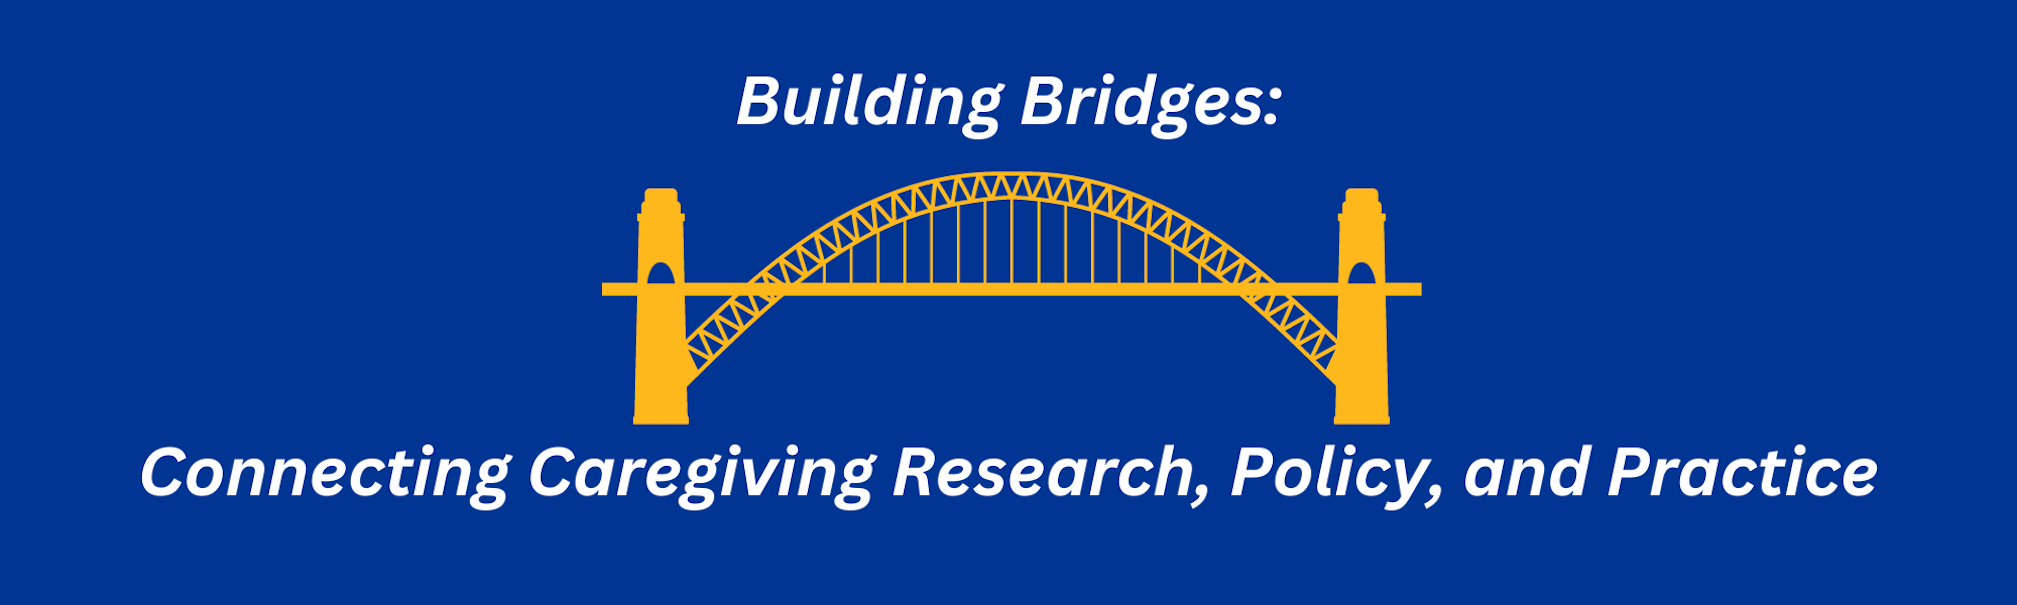 blue background with white text reading Building Bridges: Connecting Caregiving Research, Policy, and Practice